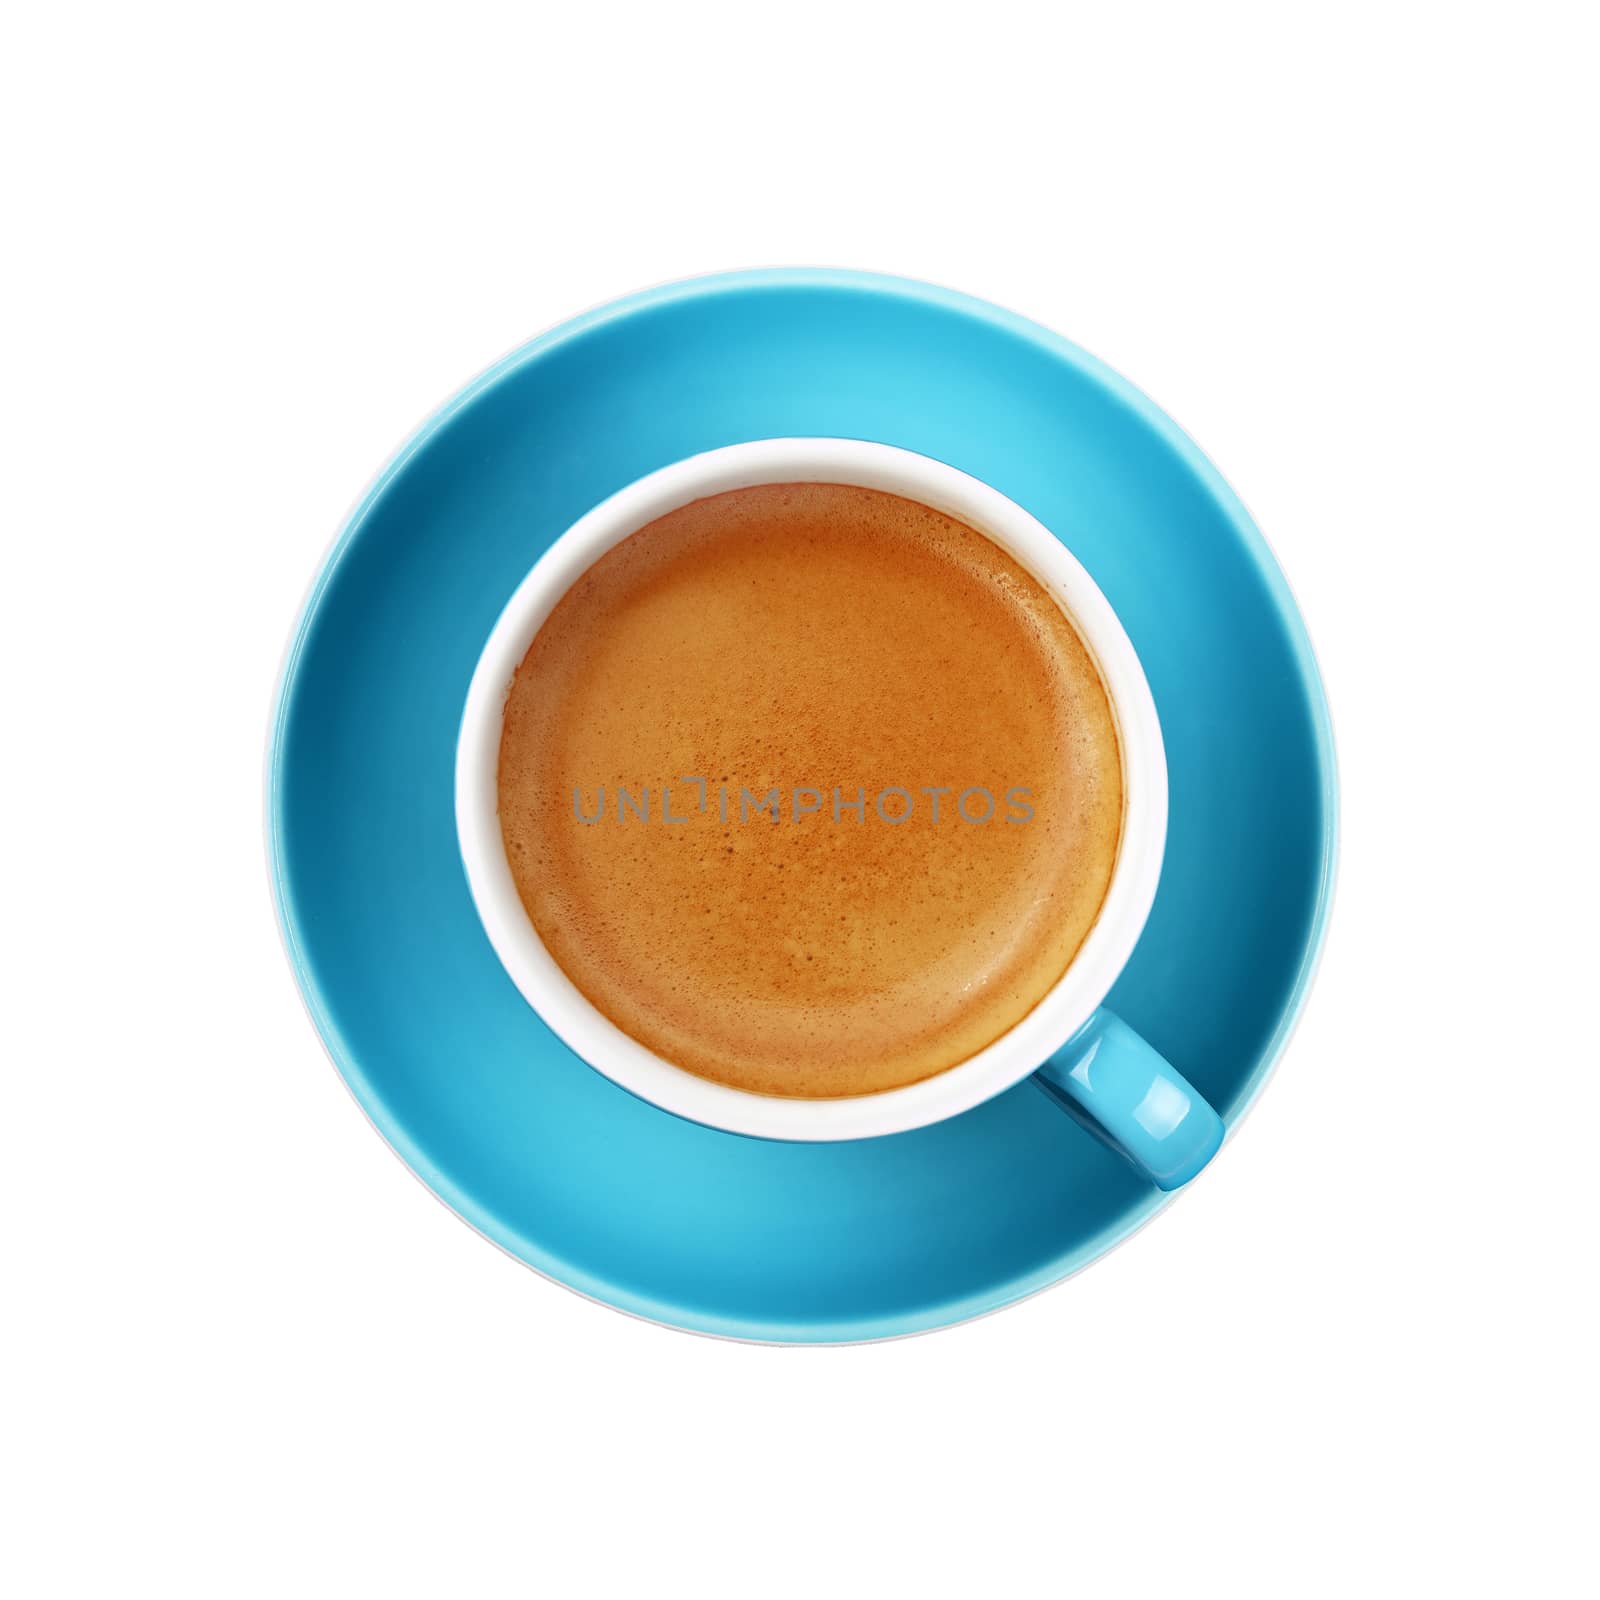 Full cup of espresso coffee on blue saucer isolated on white background, close up, elevated top view, directly above